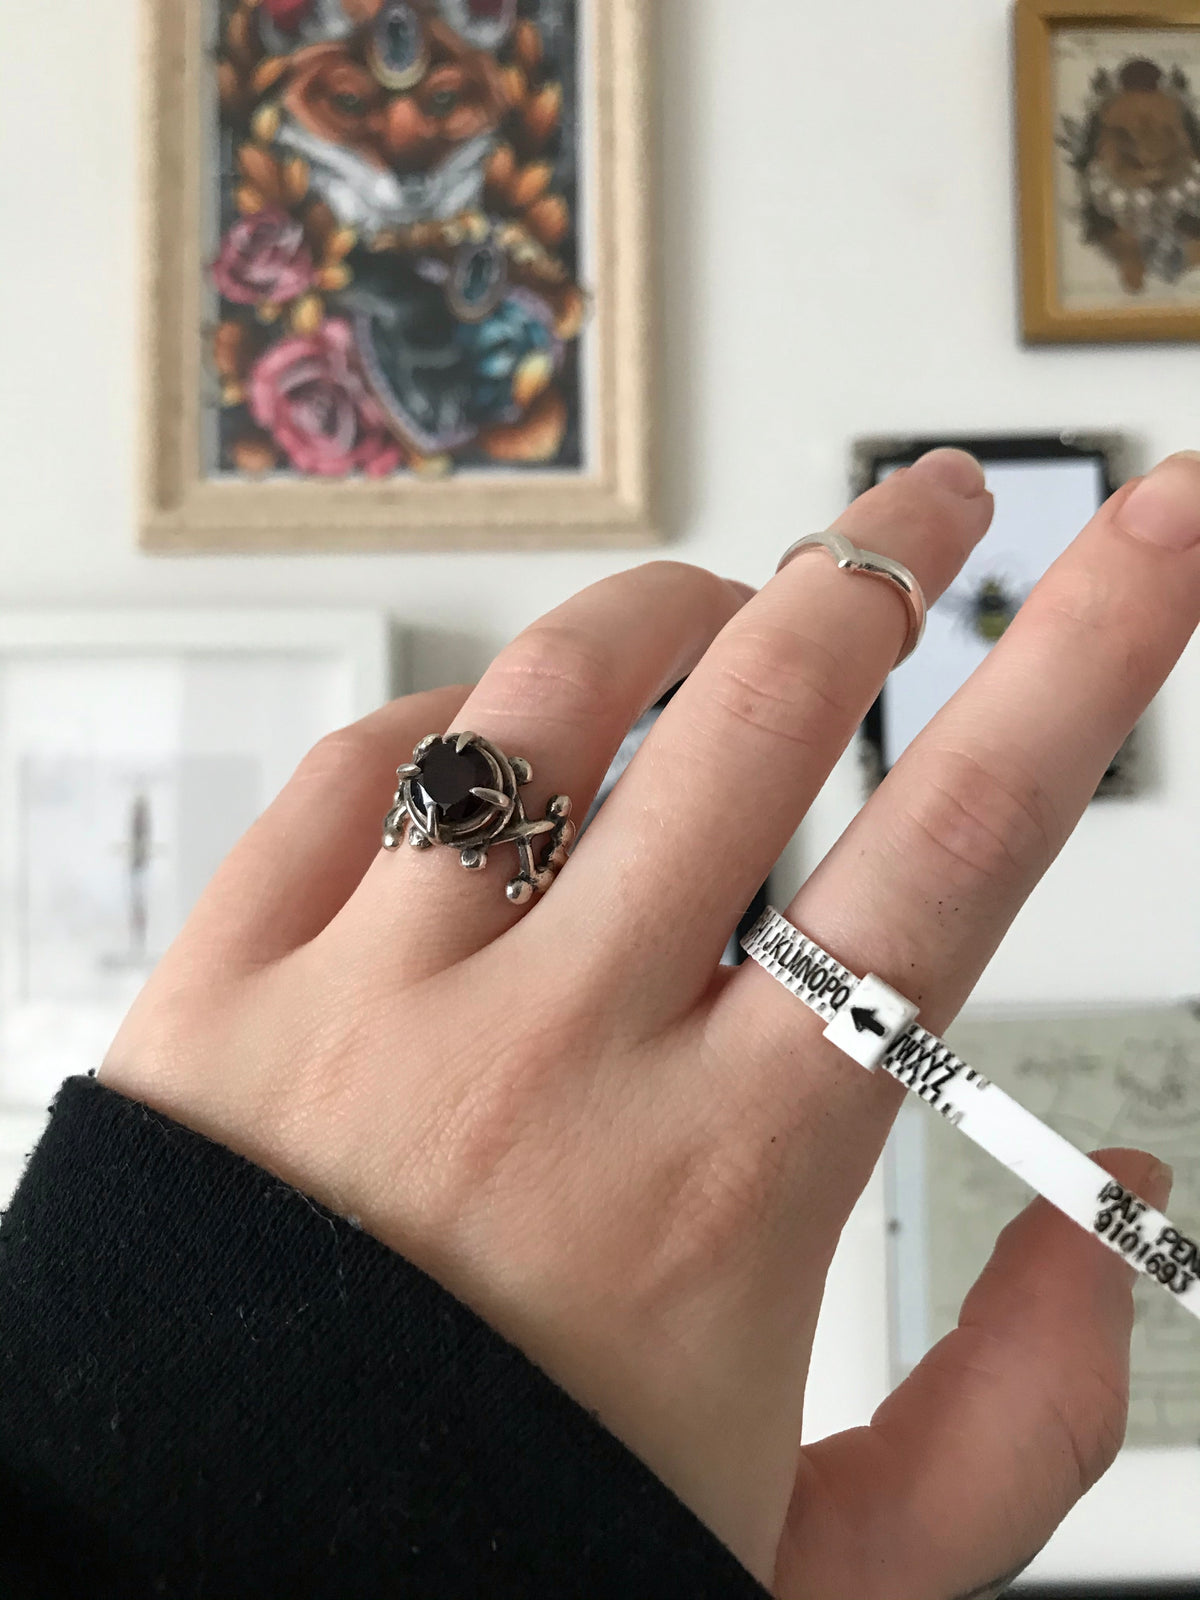 How To Make a Ring Smaller Without Resizing